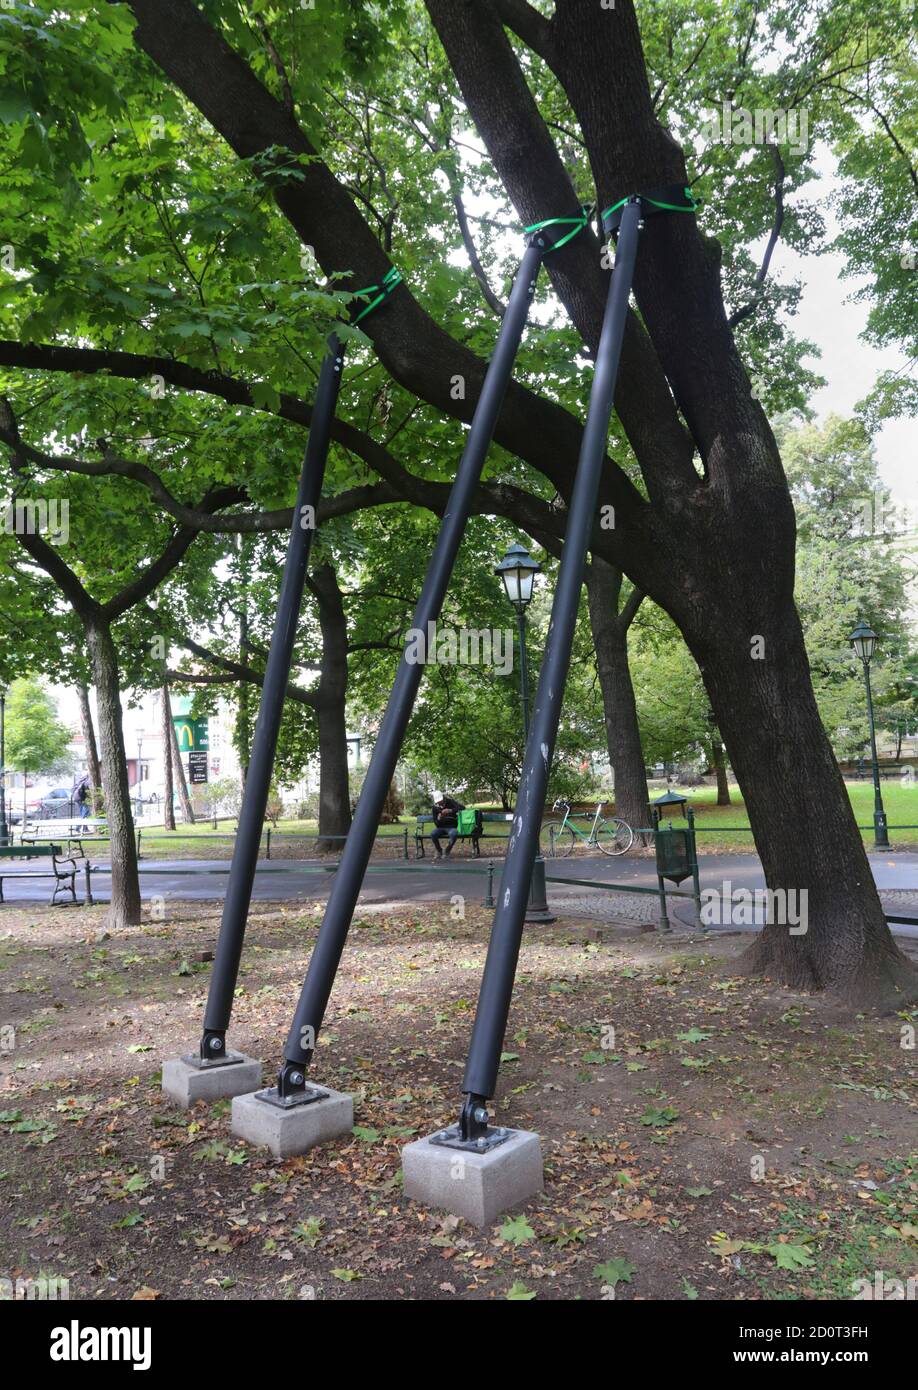 Cracow. Krakow. Poland. Planty park. Old tree supported by concrete based steel poles. Stock Photo